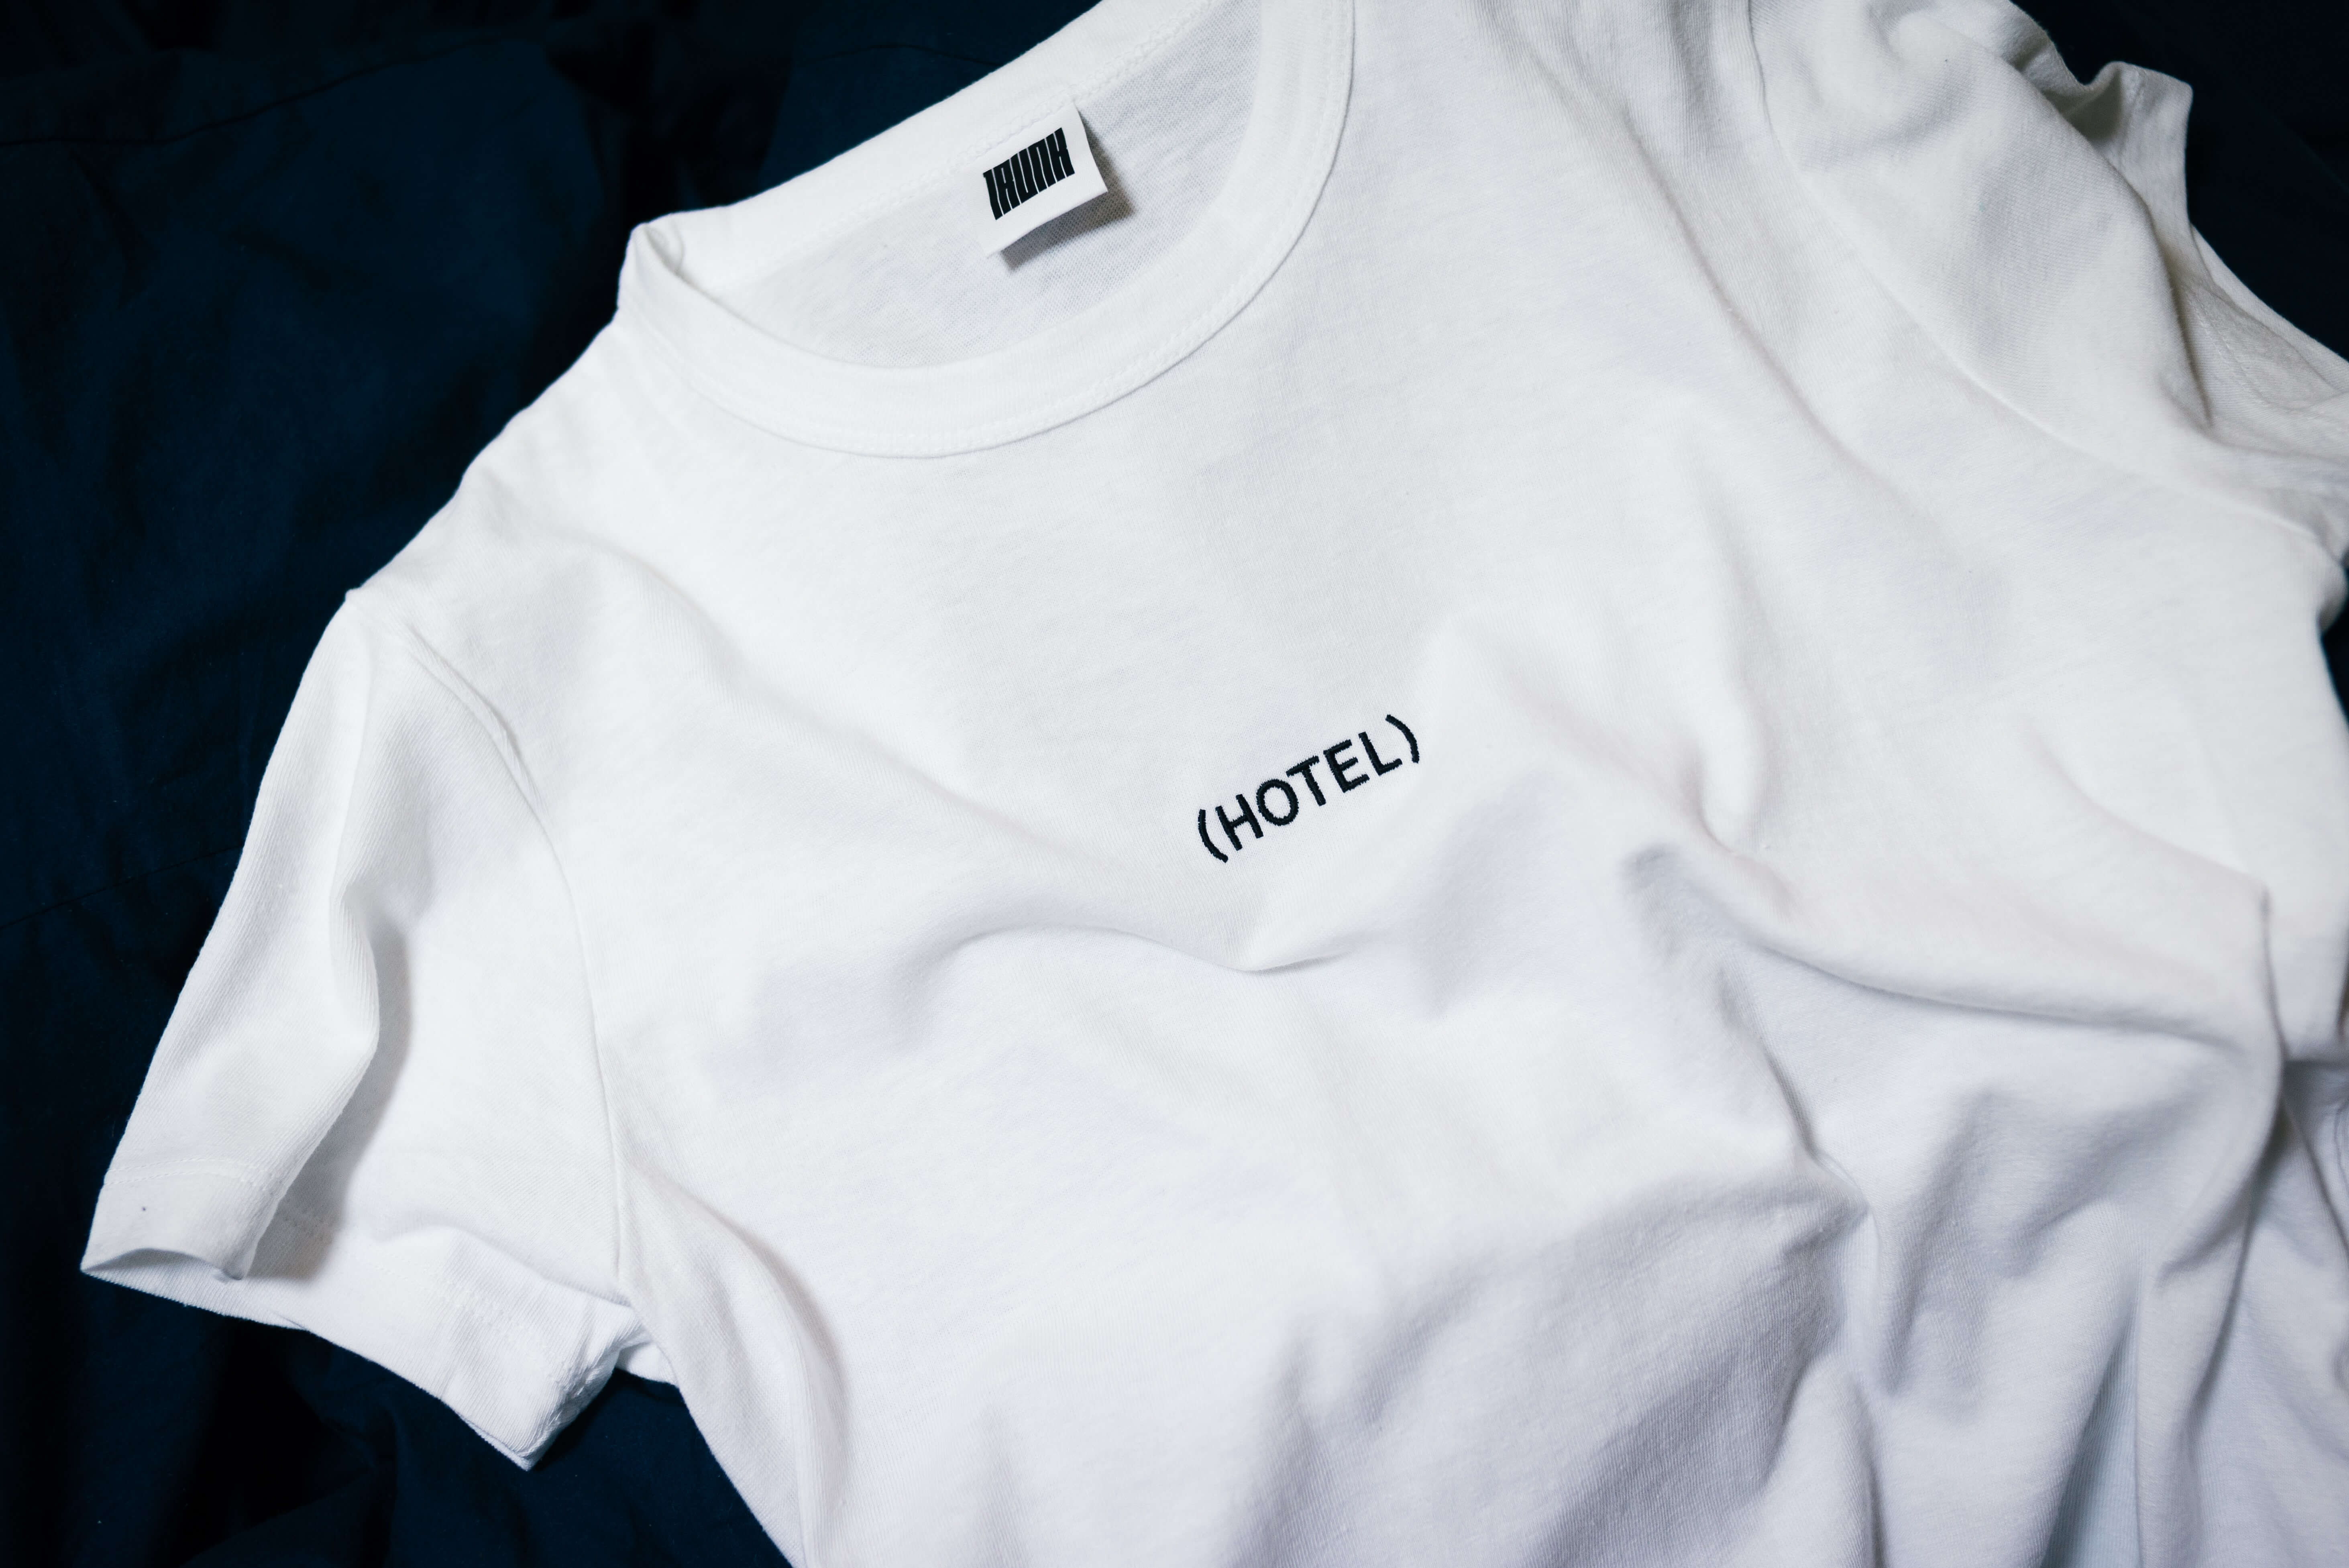 A white T-shirt with the word (HOTEL) printed on it